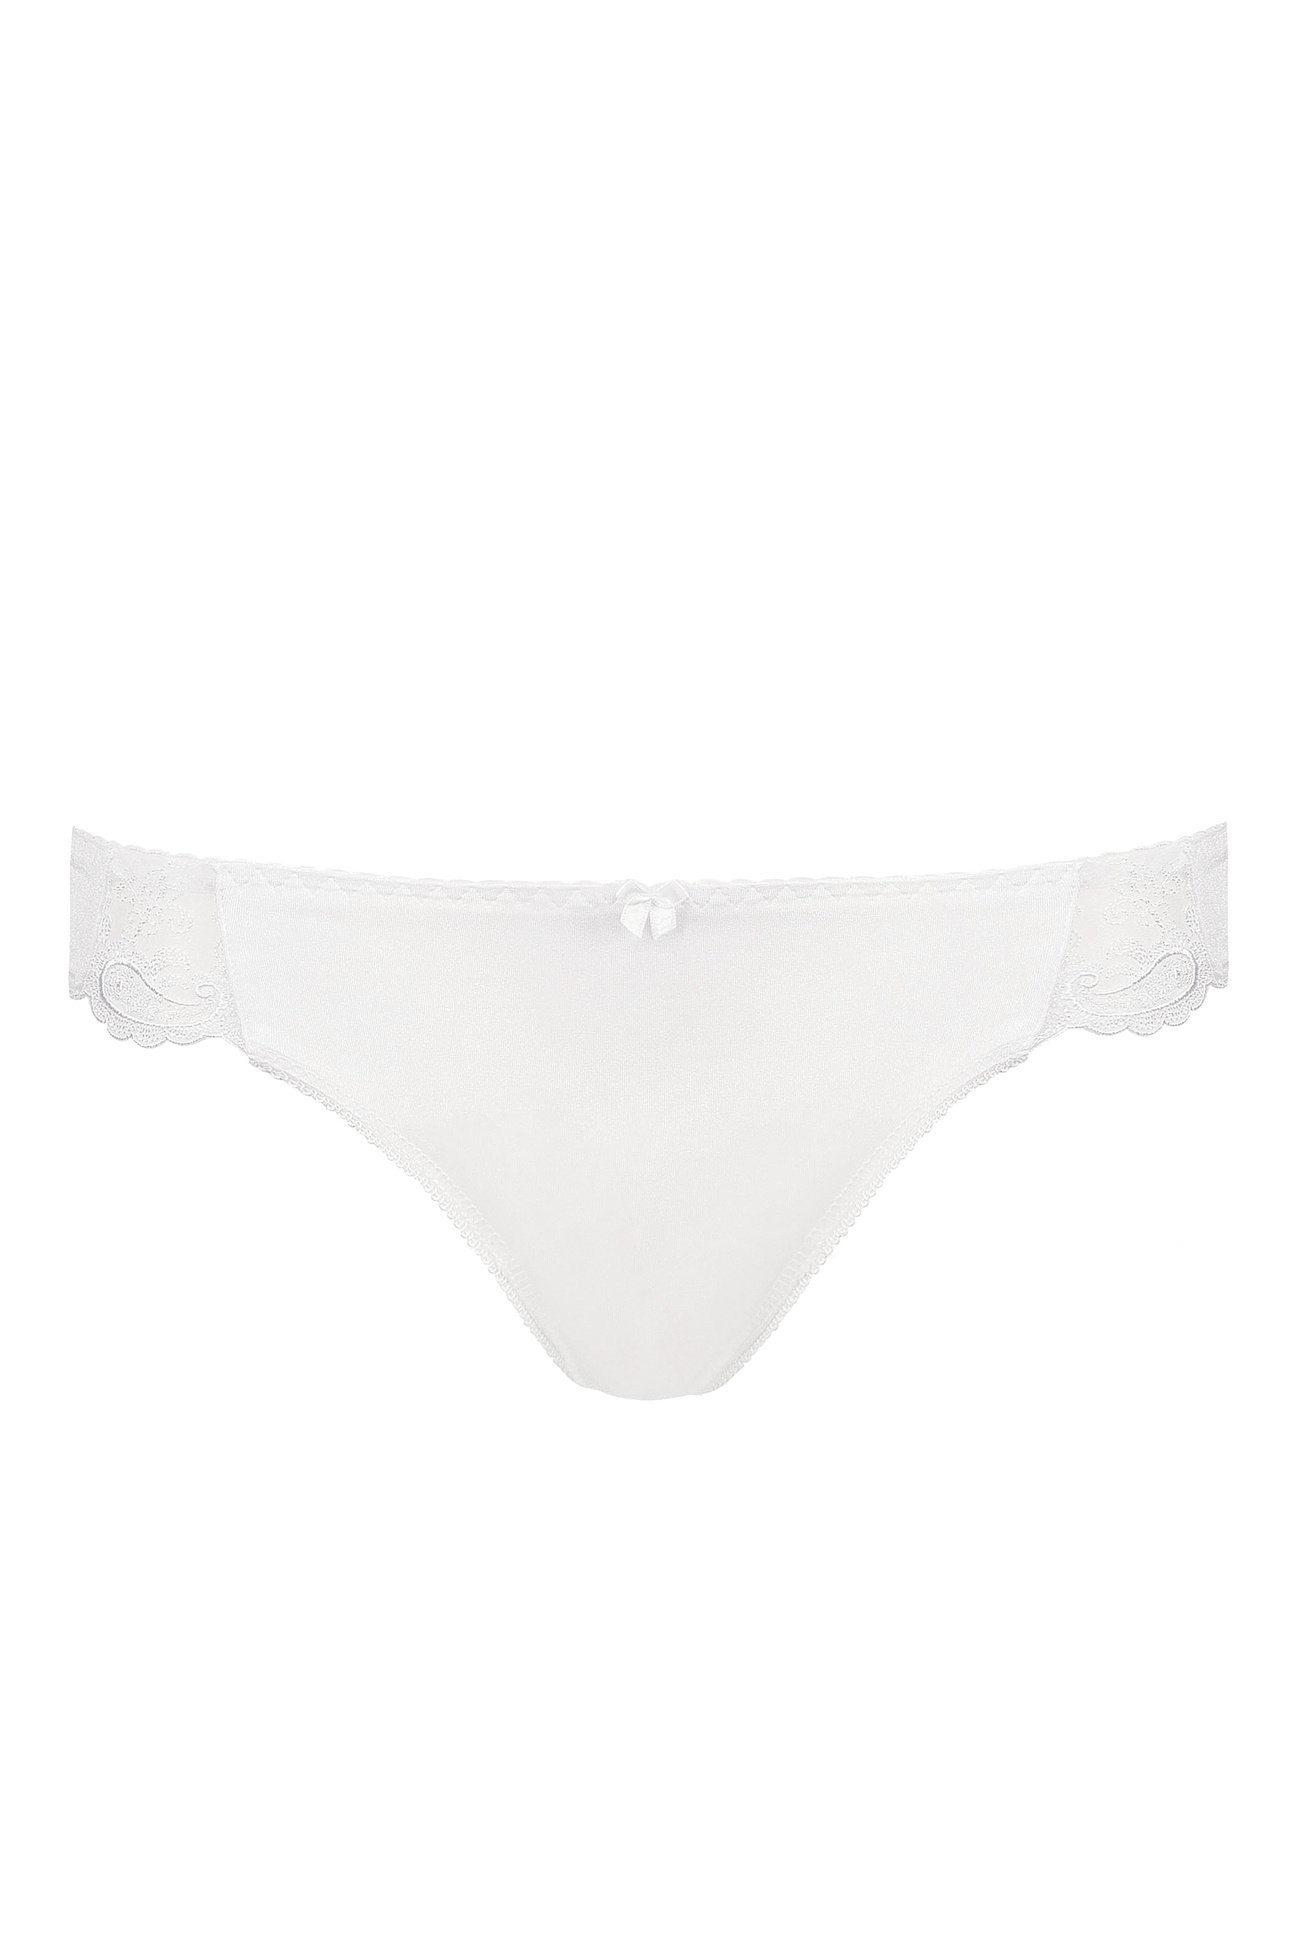 Yvette embroidered panty white